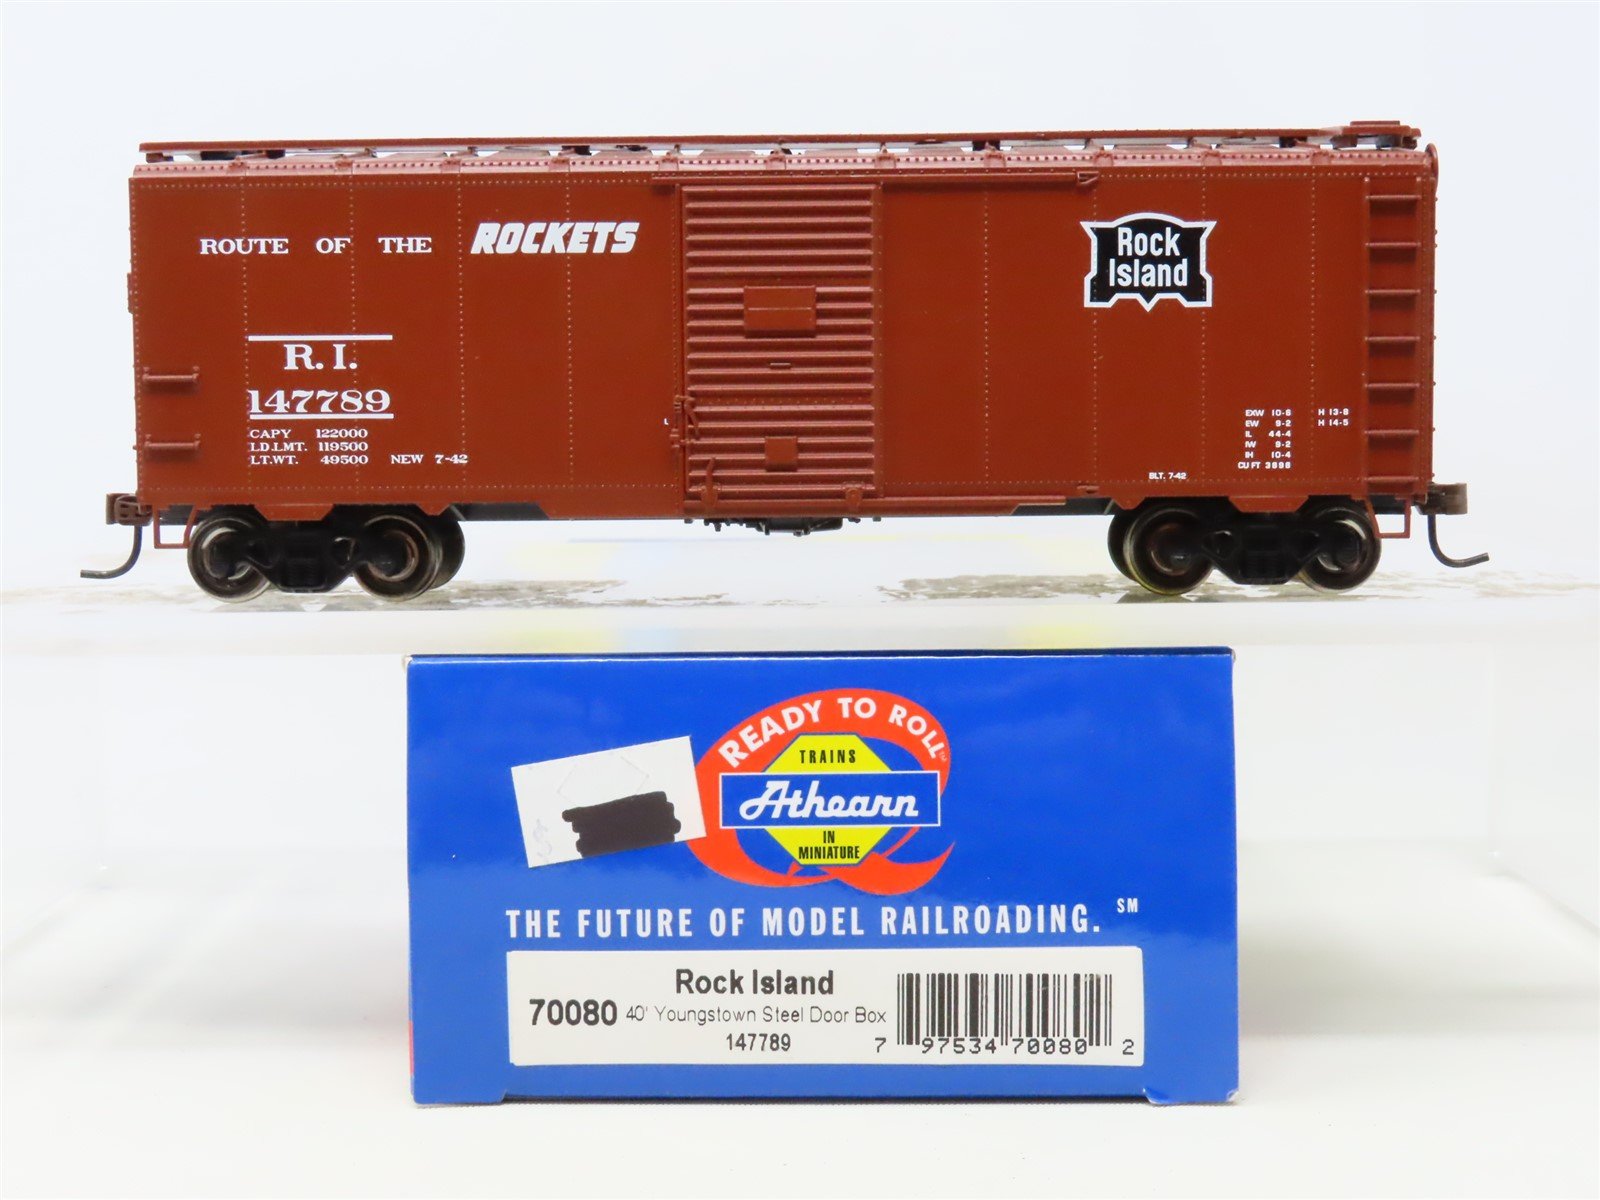 HO Scale Athearn 70080 RI Rock Island "Route Of The Rockets" 40' Boxcar #147789